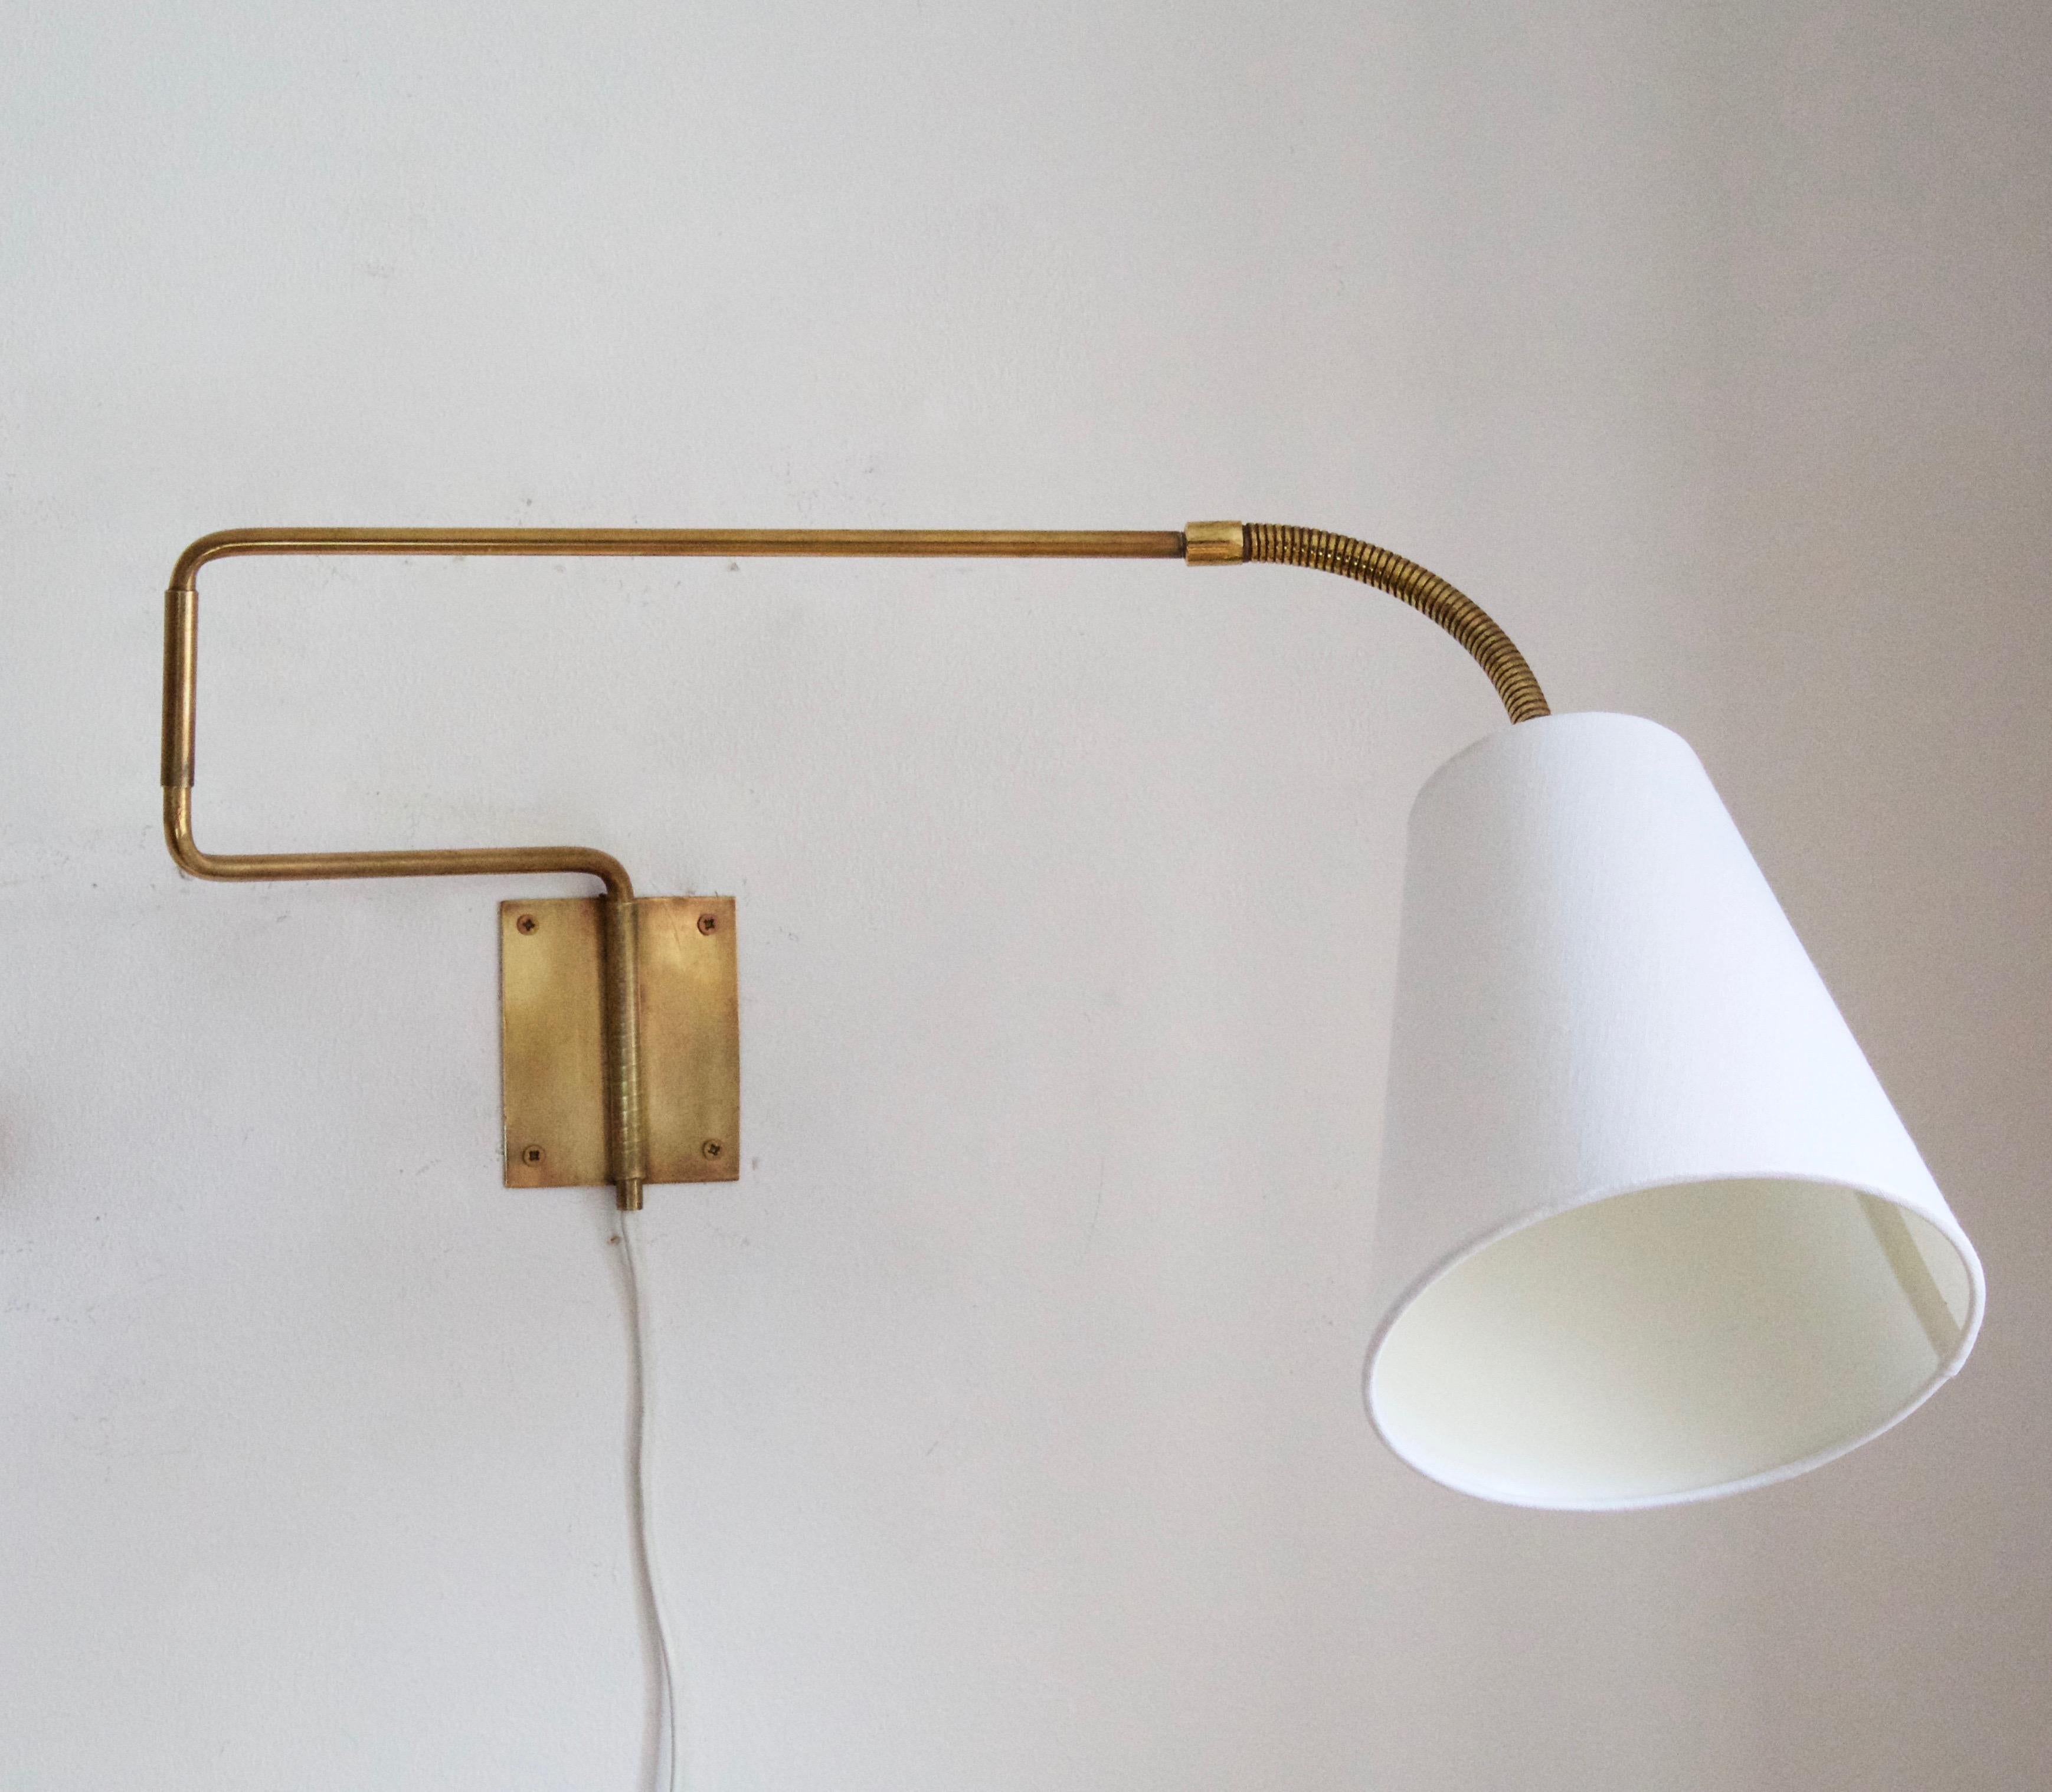 A functionalist wall light / task light, designed and produced in Sweden, 1940s-1950s. Features brass. Fabric lampshade. Adjustable.

Stated dimensions with lampshade attached as is illustrated in the primary image.

  